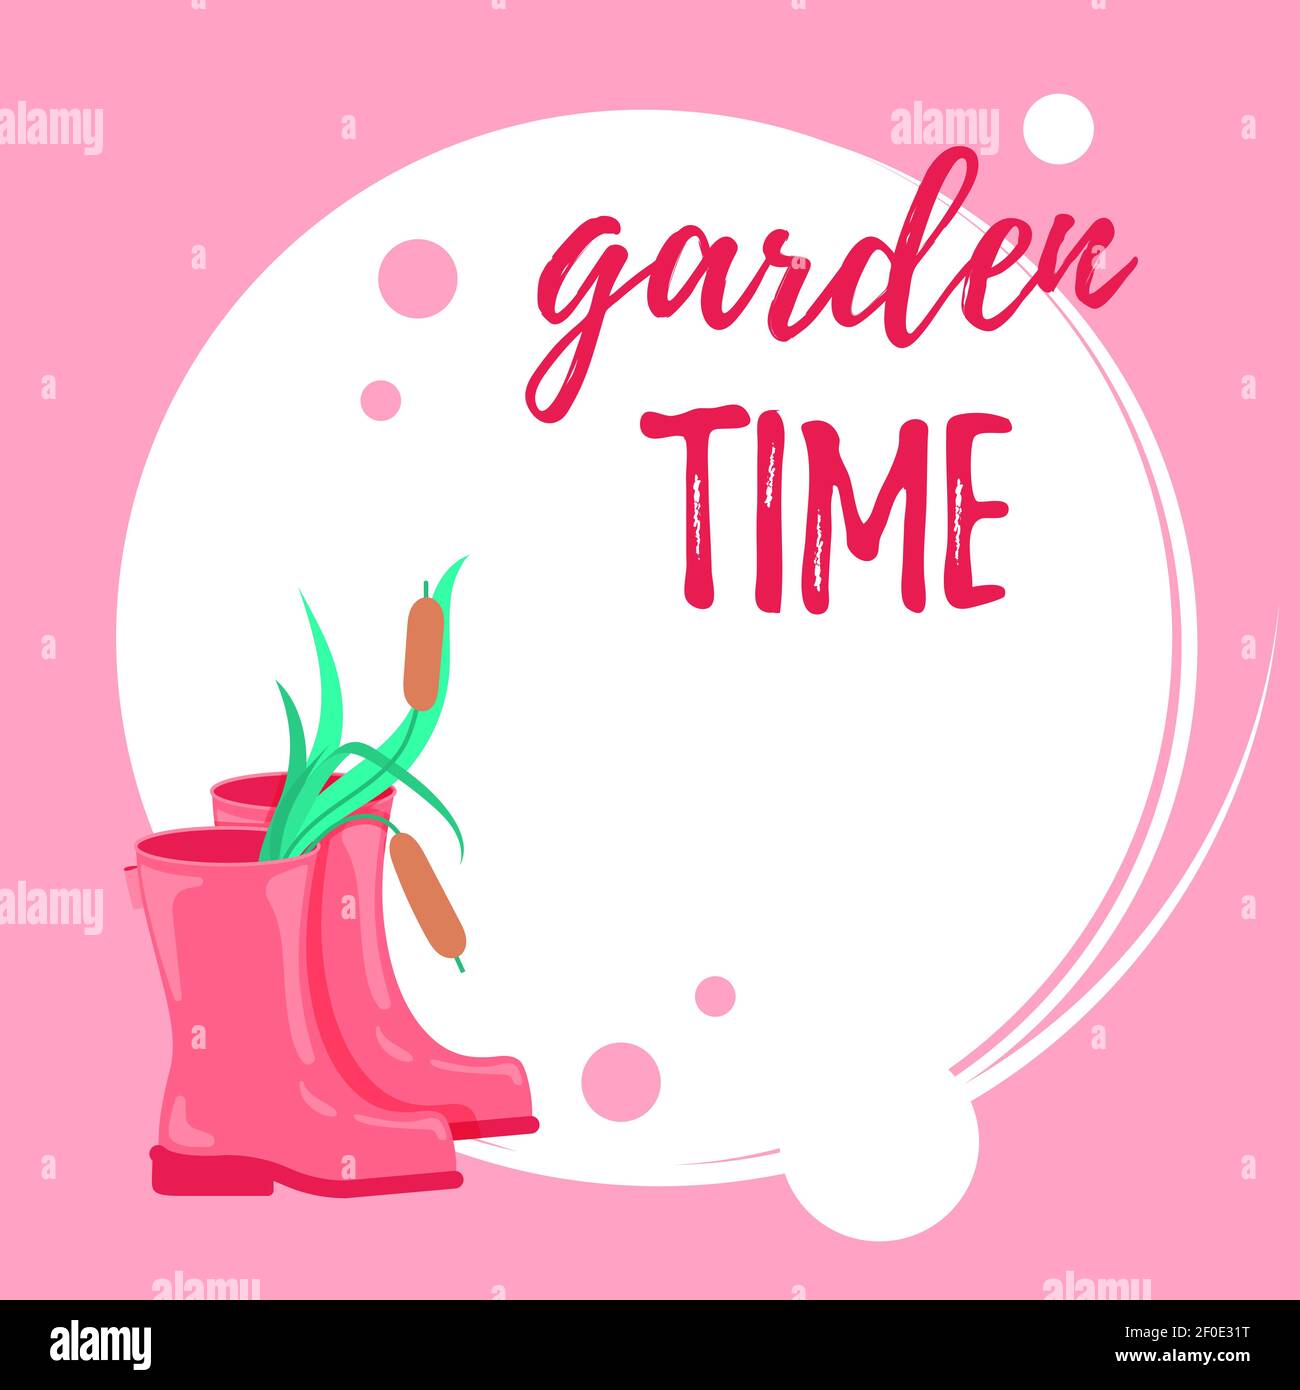 Pink rubber boots with reeds inside. Garden time card with copy space for text. Greeting, invitation card Stock Vector